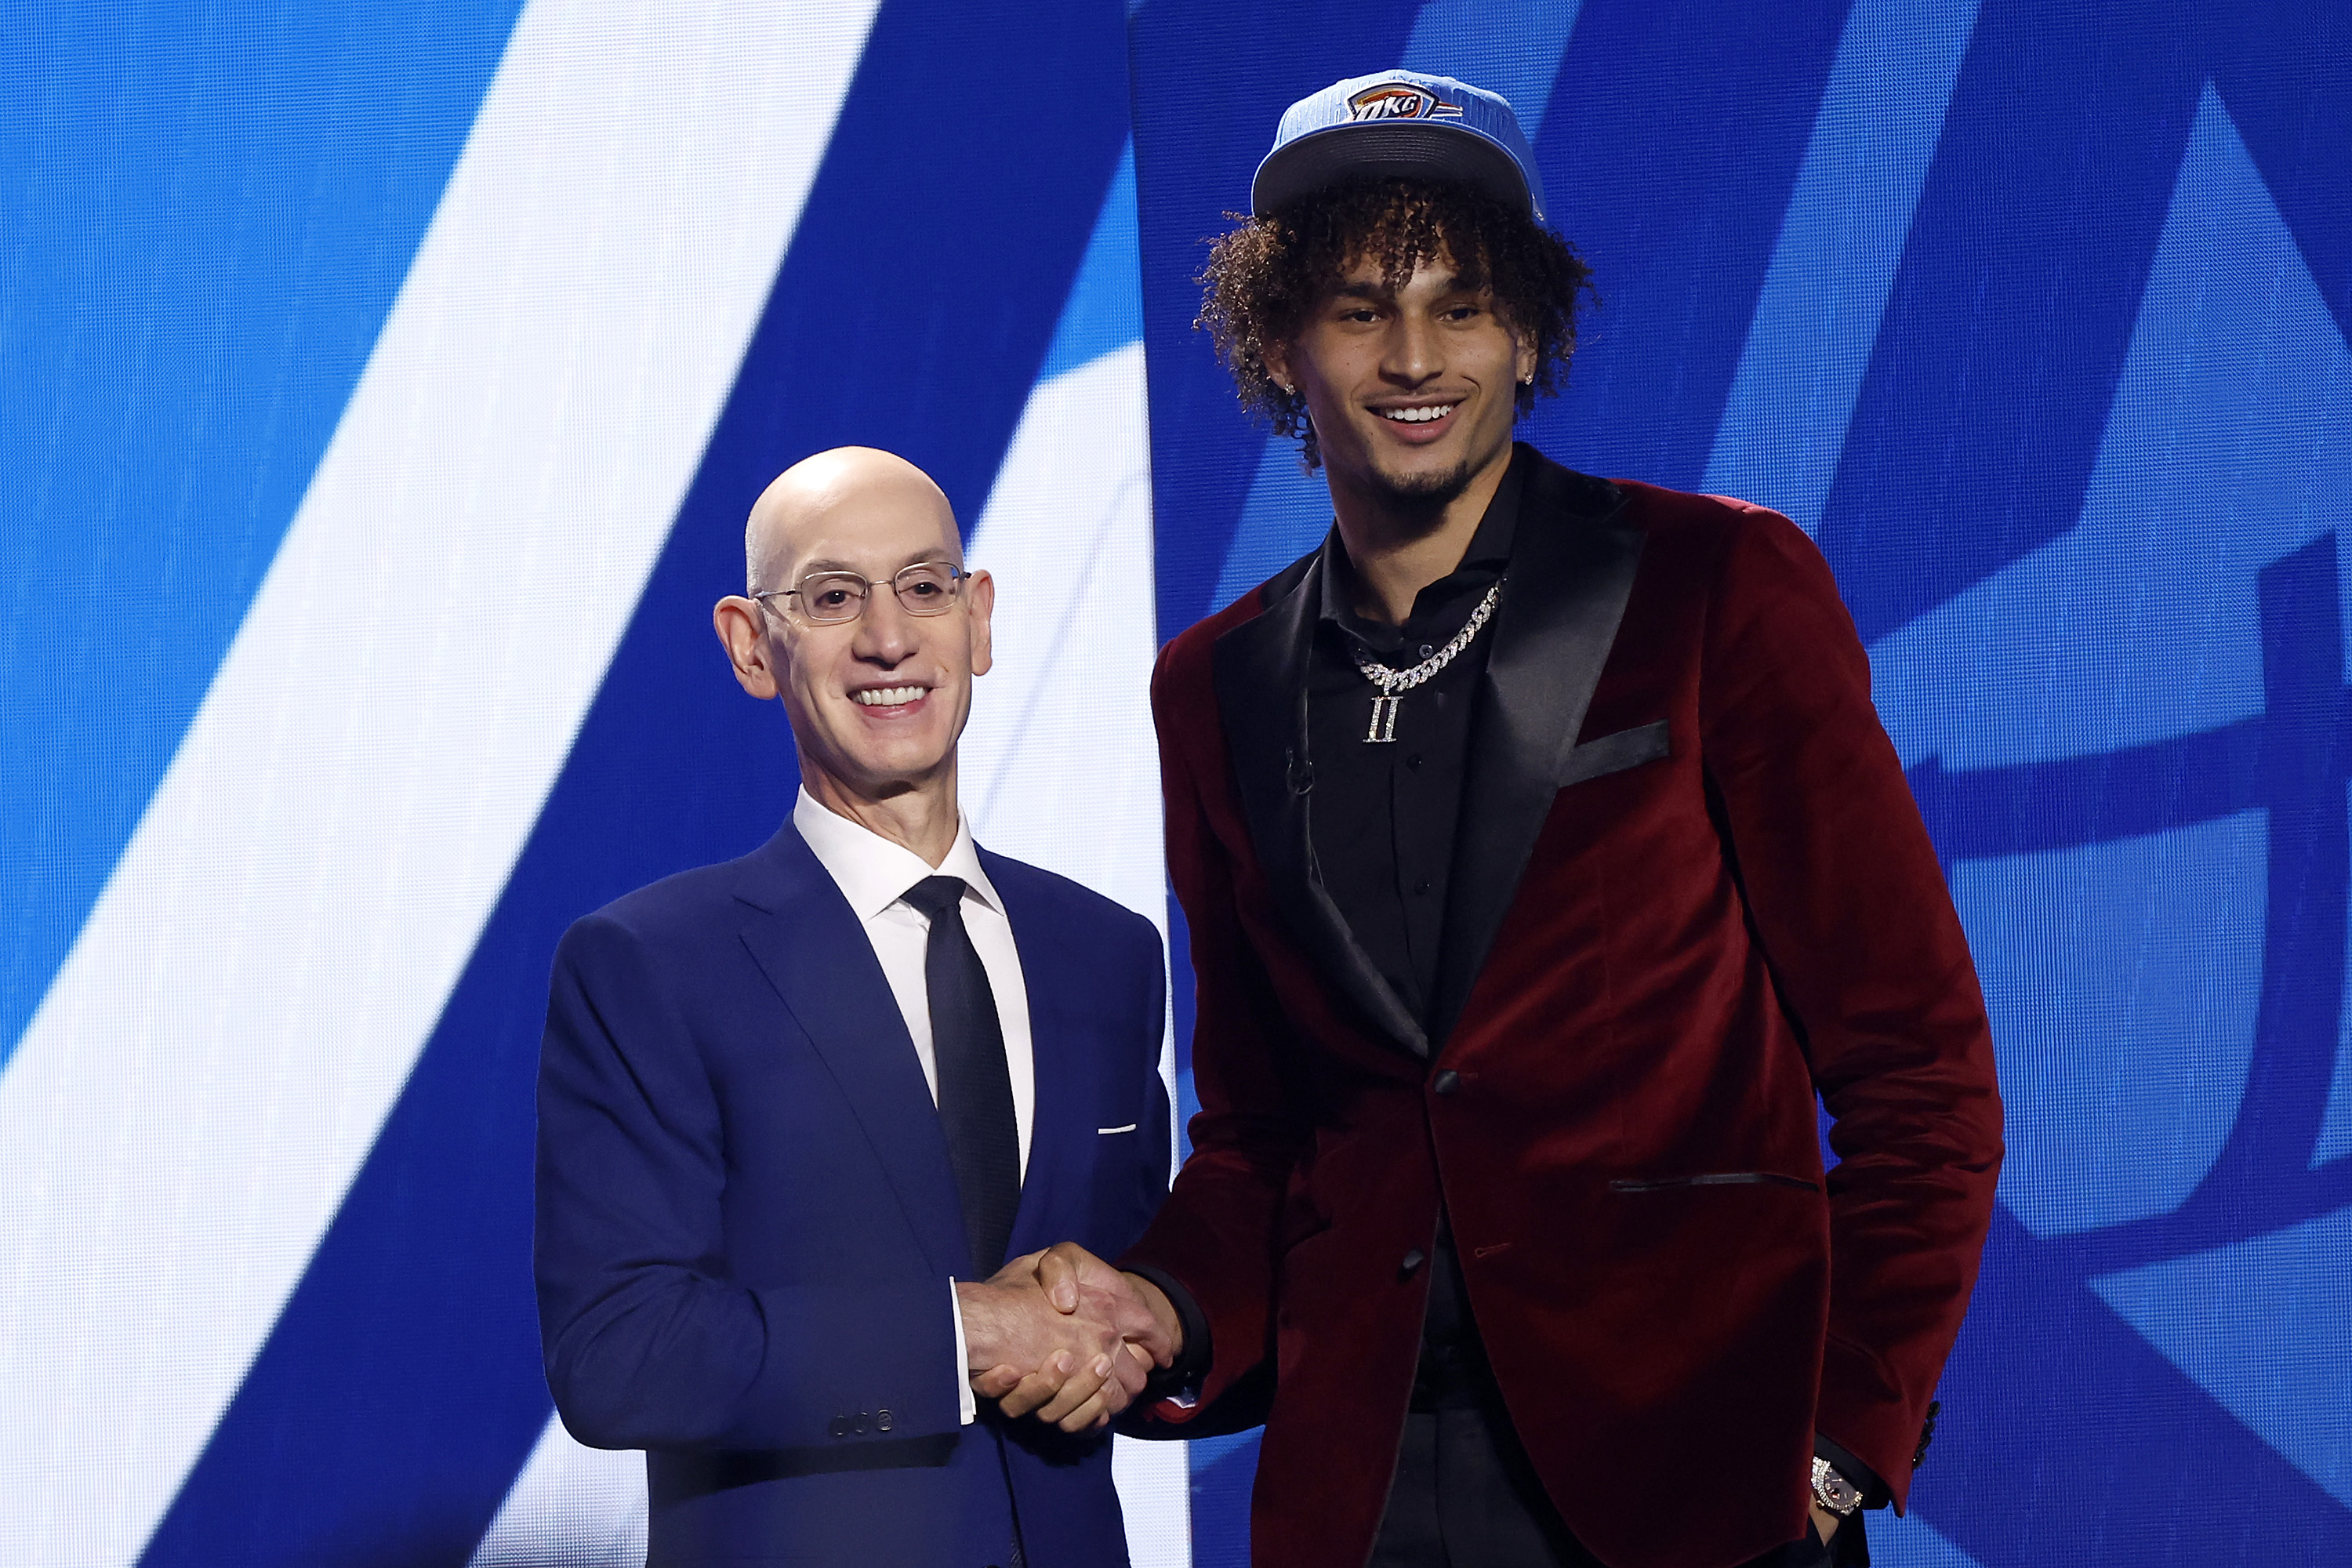 Oklahoma City Thunder select Dereck Lively II (R) from Duke University with the 12th pick and trade him to the Dallas Mavericks in the NBA Draft at the Barclays Center in Brooklyn, New York City, June 22, 2023. /CFP